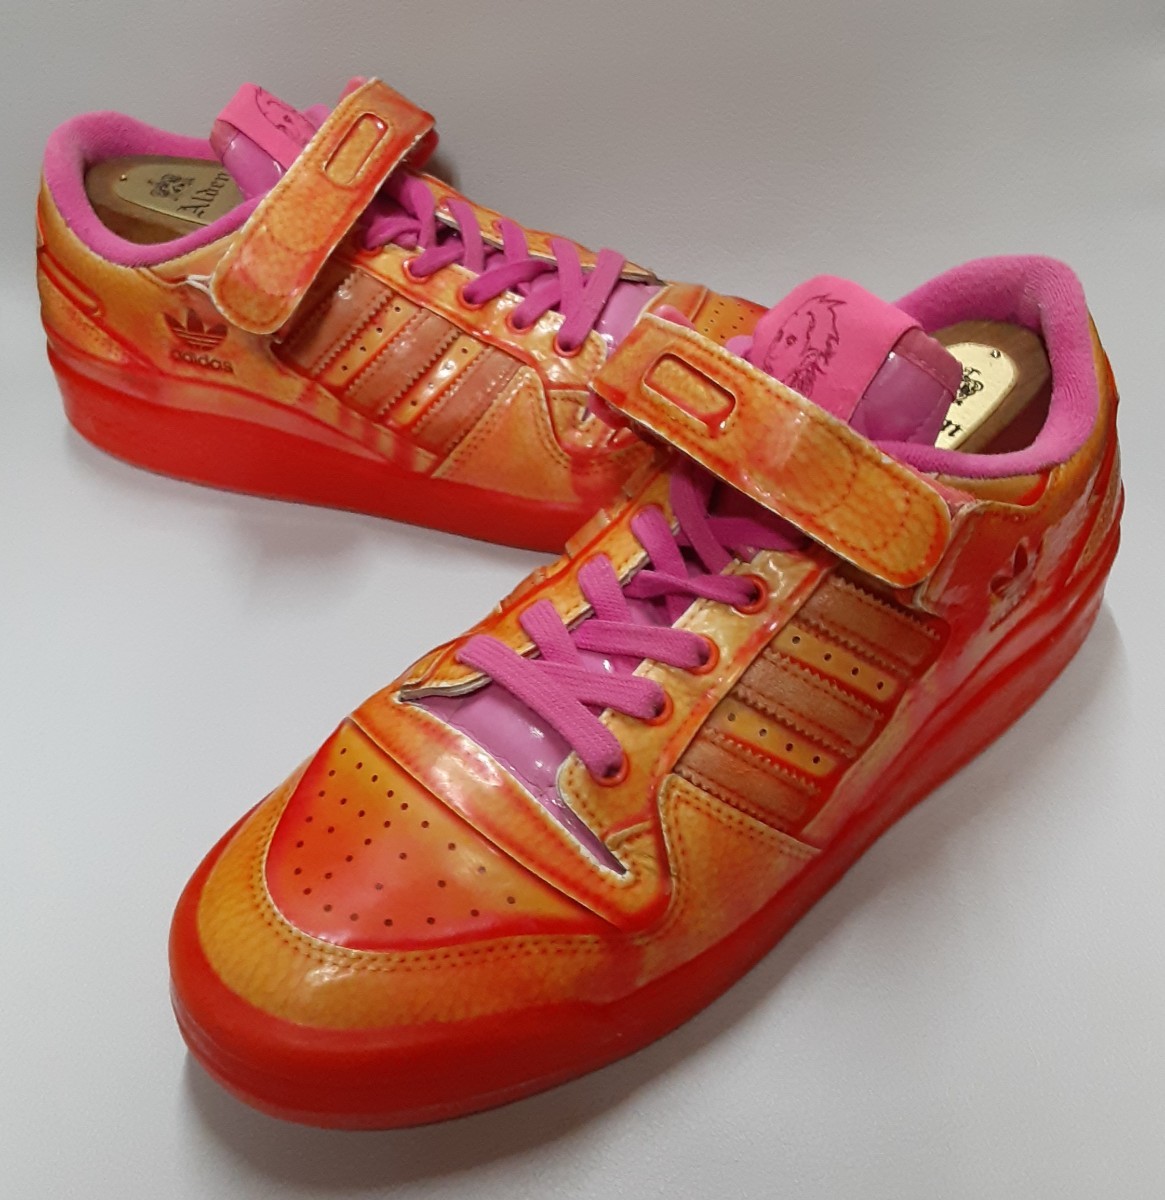  most price! superior article!.20900 jpy! special order antique processing!fareru* Williams collaboration! Adidas forum high class sneakers! rare vitamin color!26.5